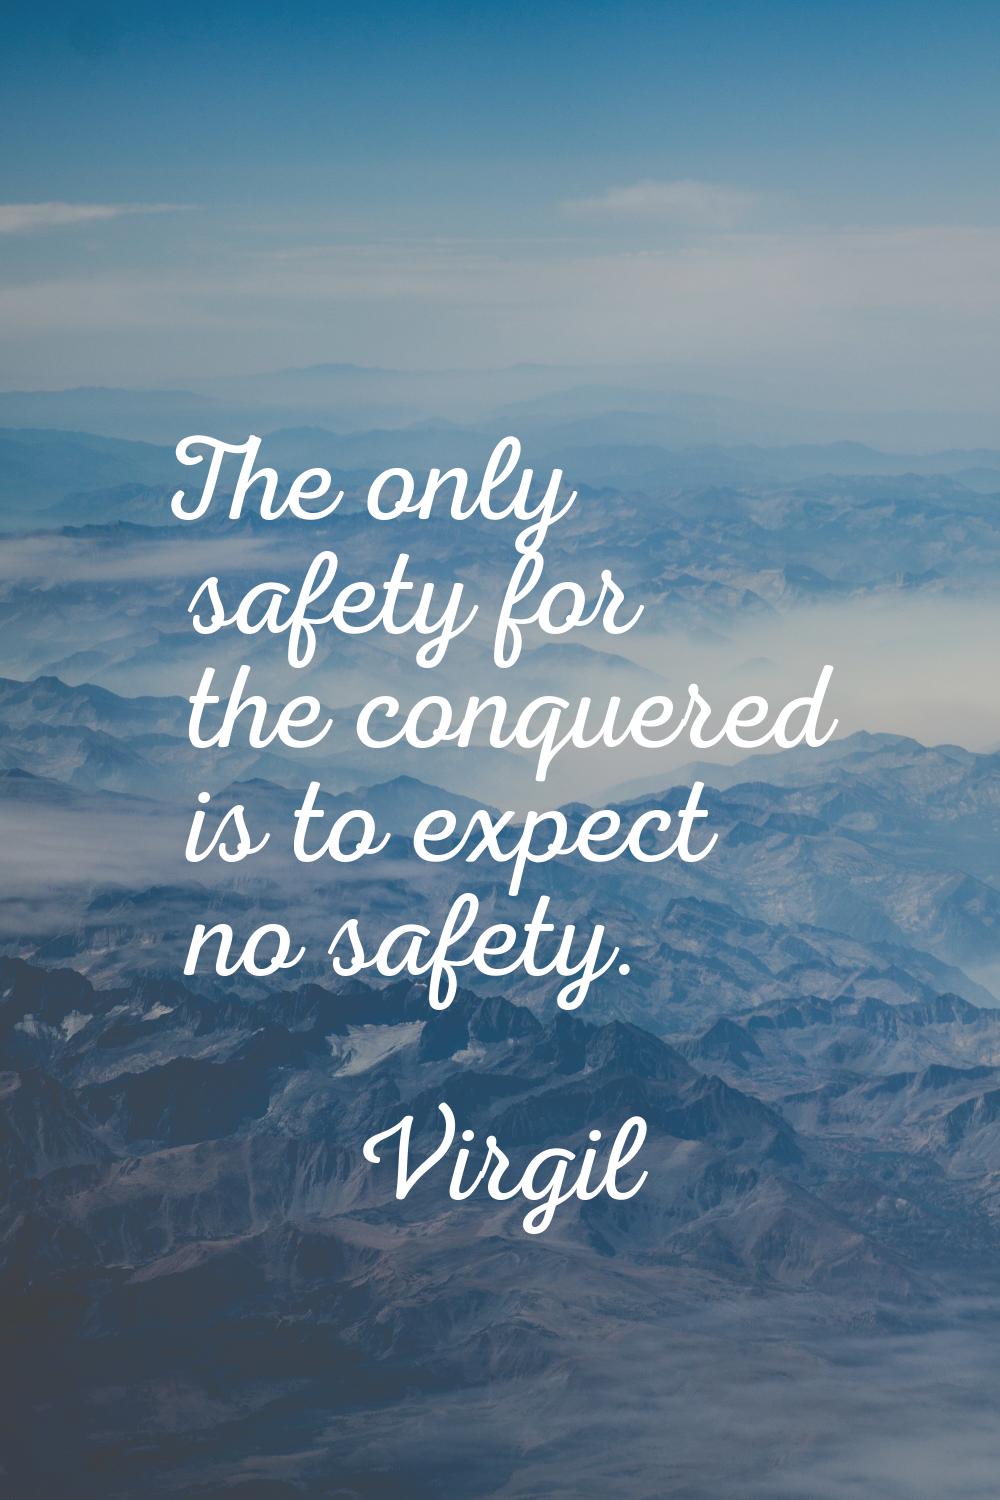 The only safety for the conquered is to expect no safety.